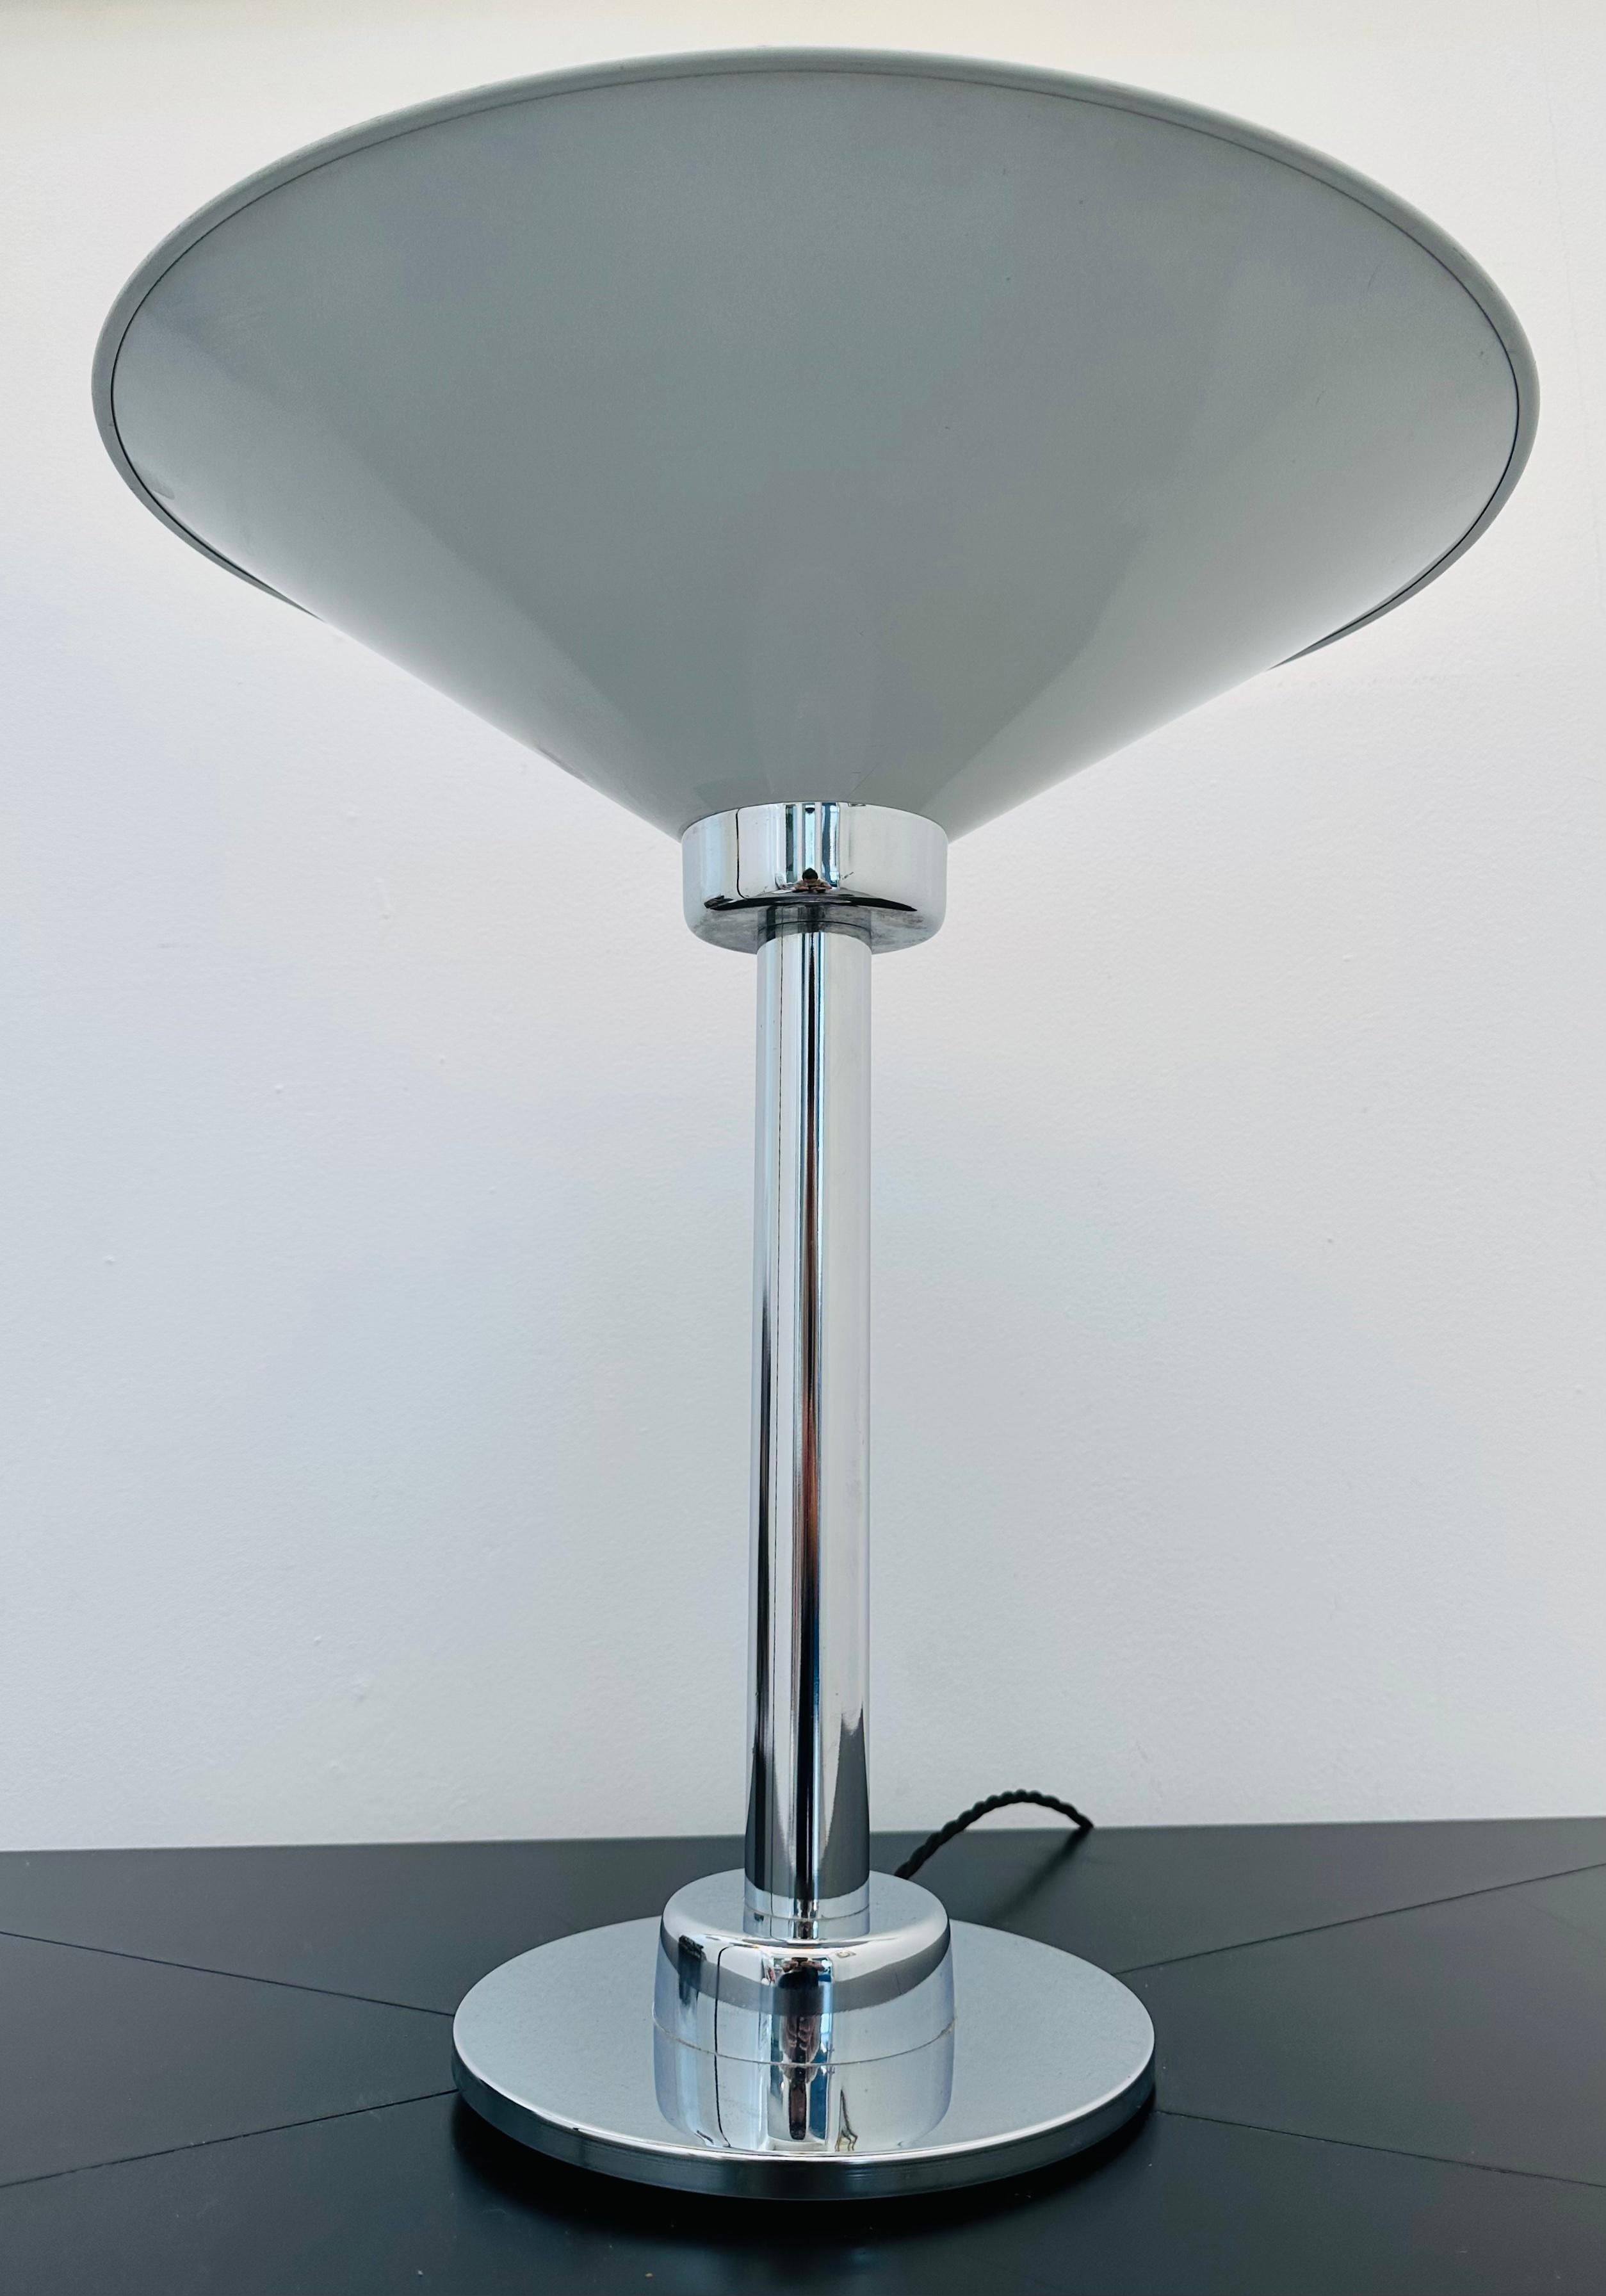 20th Century 1970s Italian Conical Enamelled White Metal & Chrome Uplighter Table Lamp For Sale